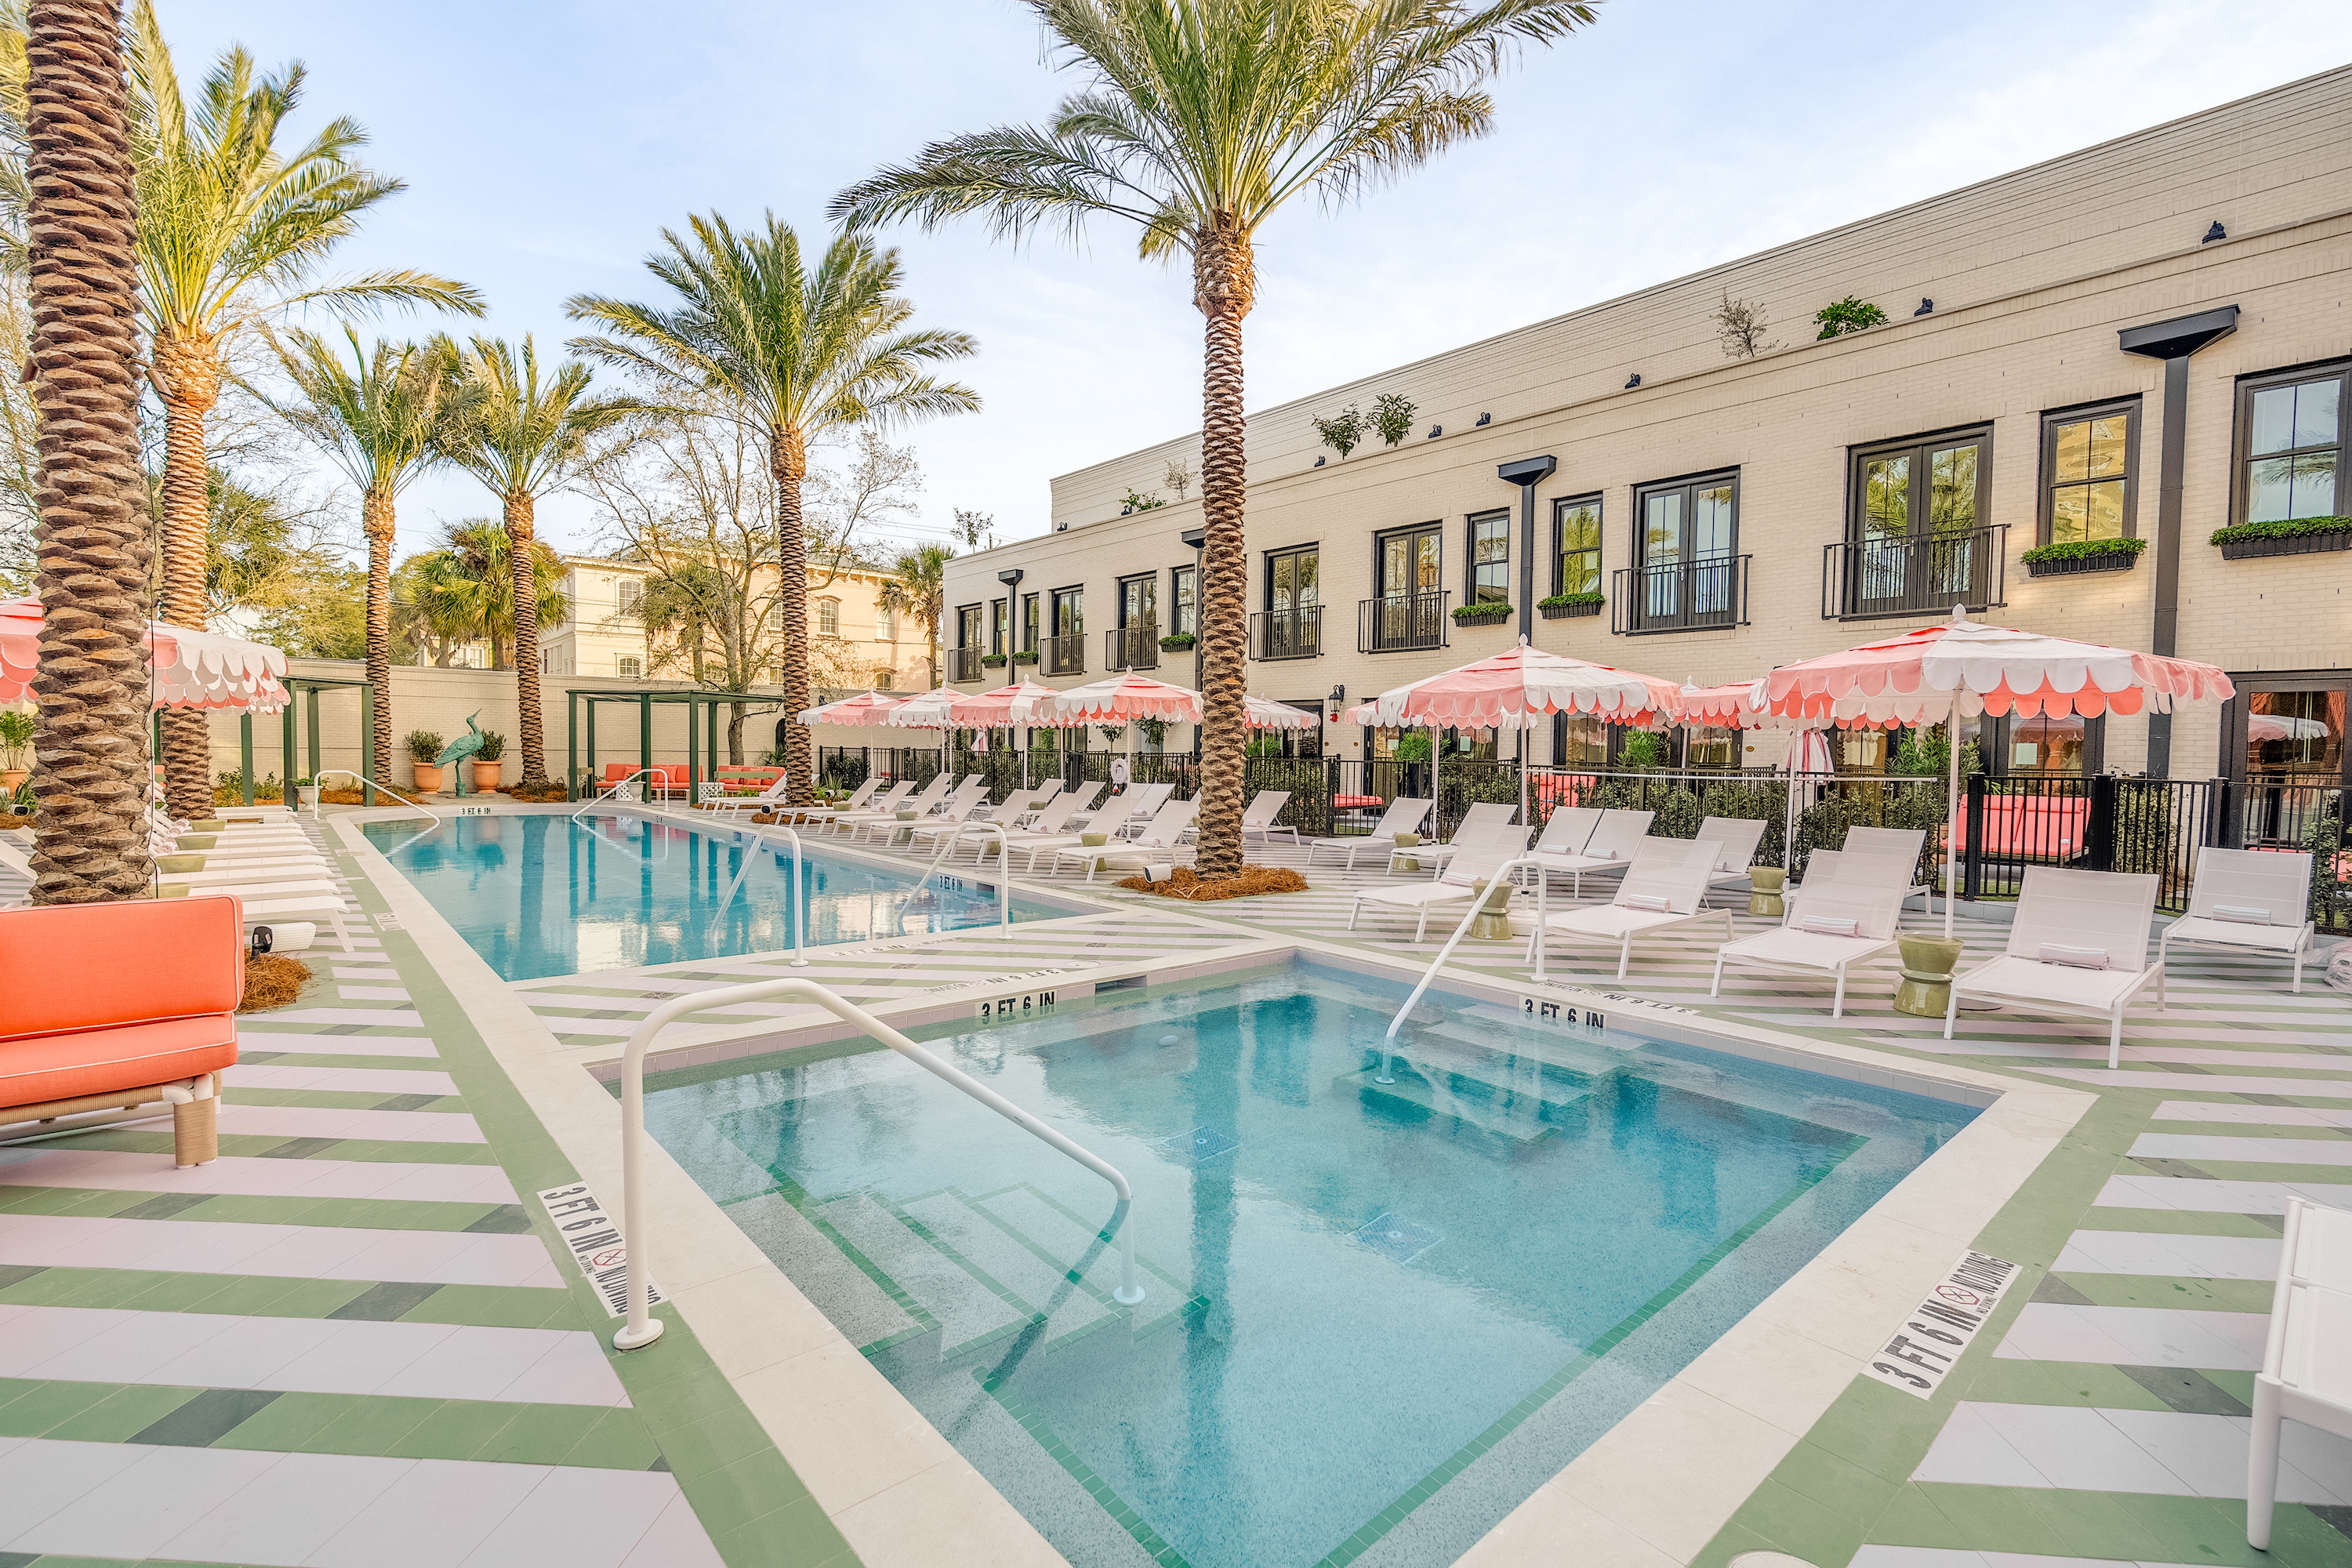 A hotel pool piazza with pink umbrellas, lounge chairs, and striped floor detailing